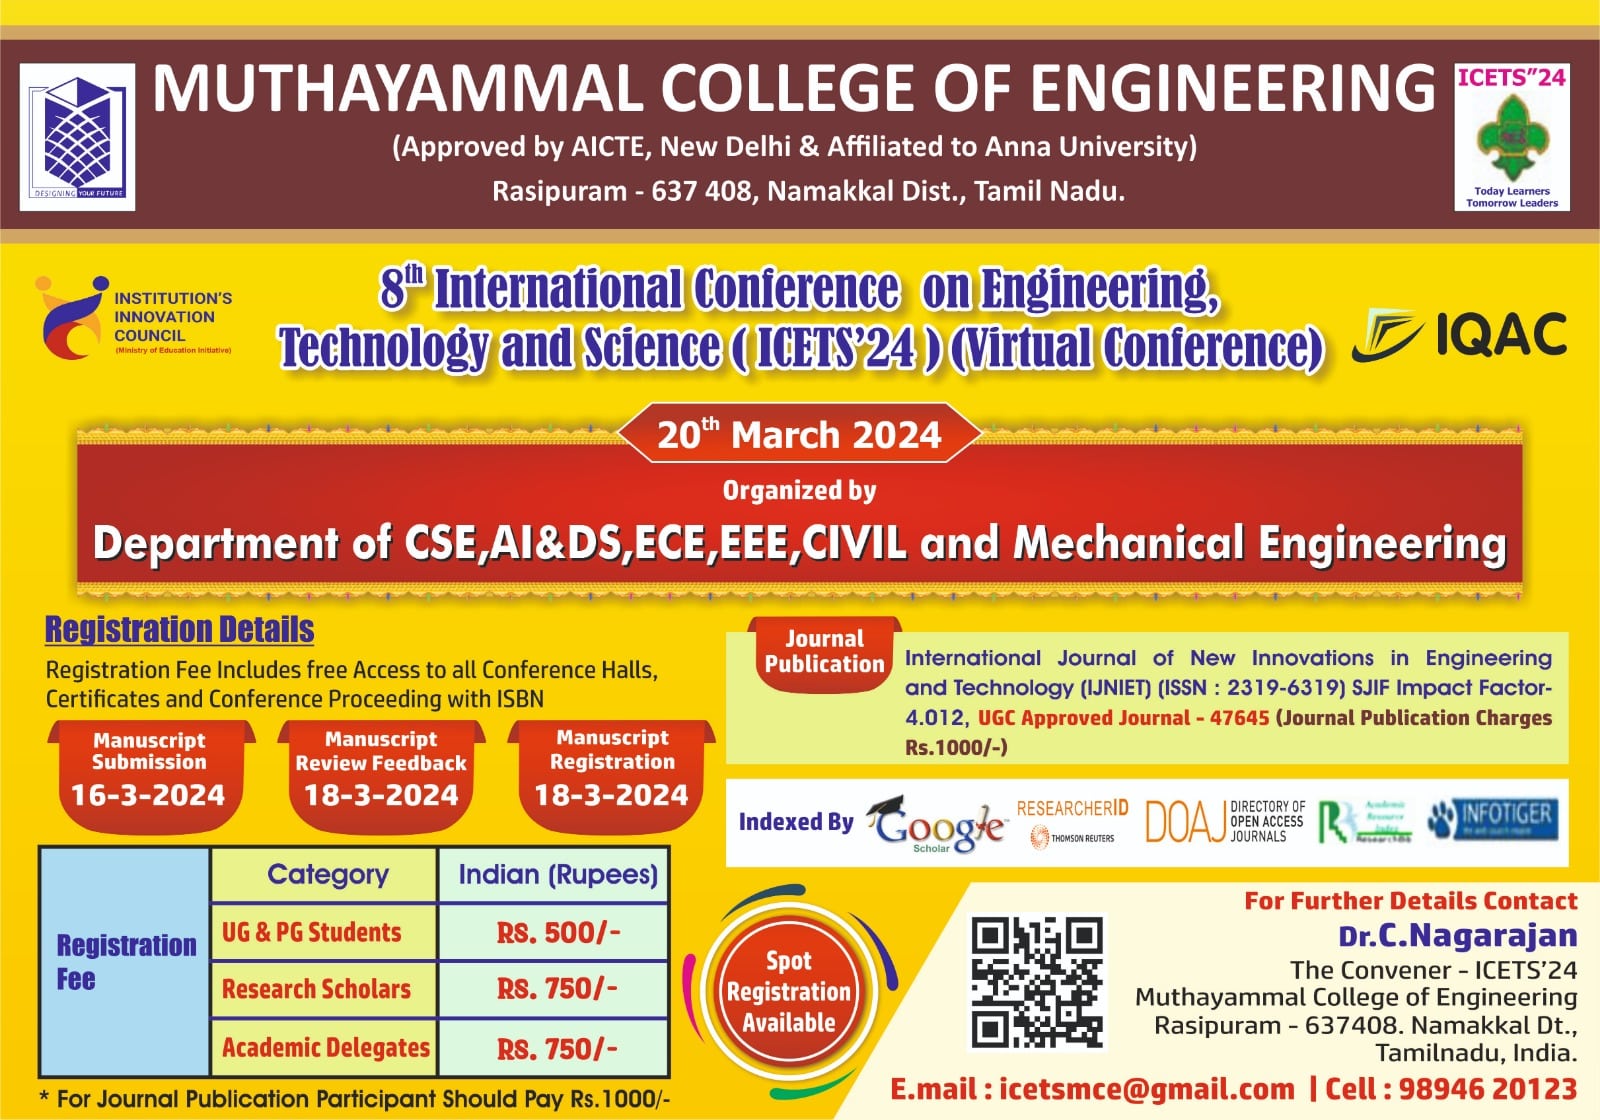 8th International Conference on Engineering Technology and Science “ICETS’24”